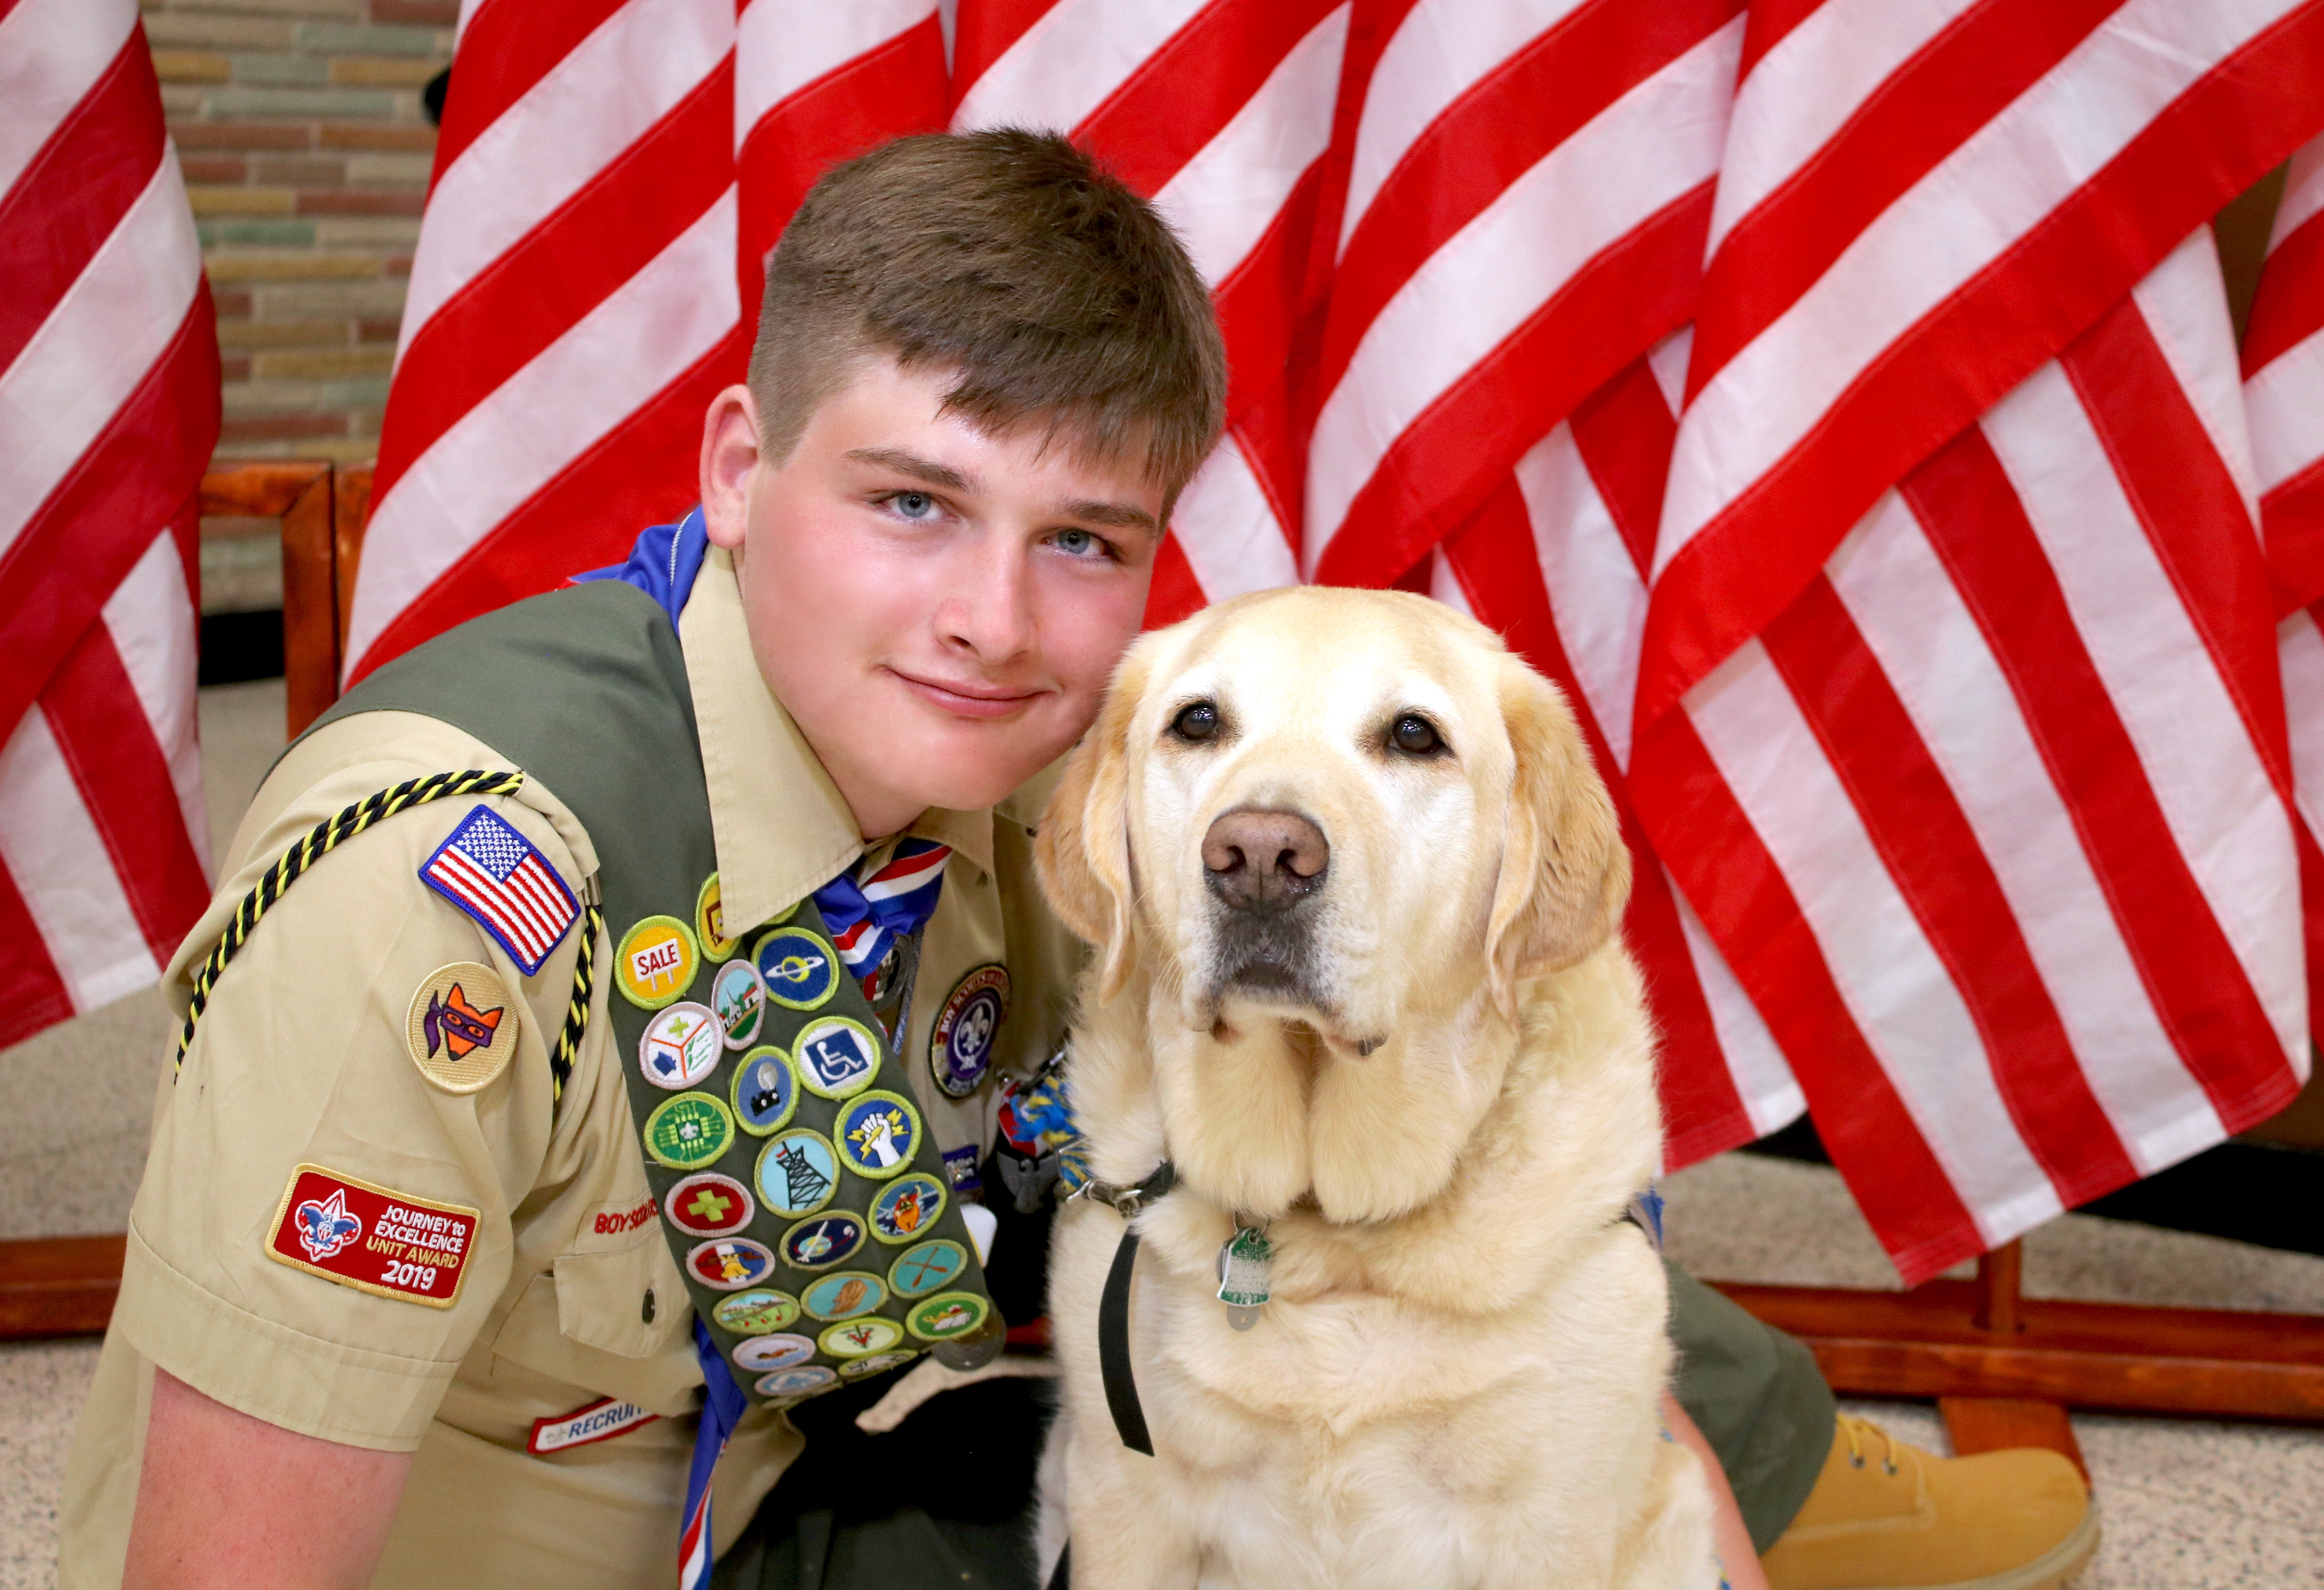 A young man in a Boy Scout uniform sits next to his yellow Labrador service dog with American flags in the background.